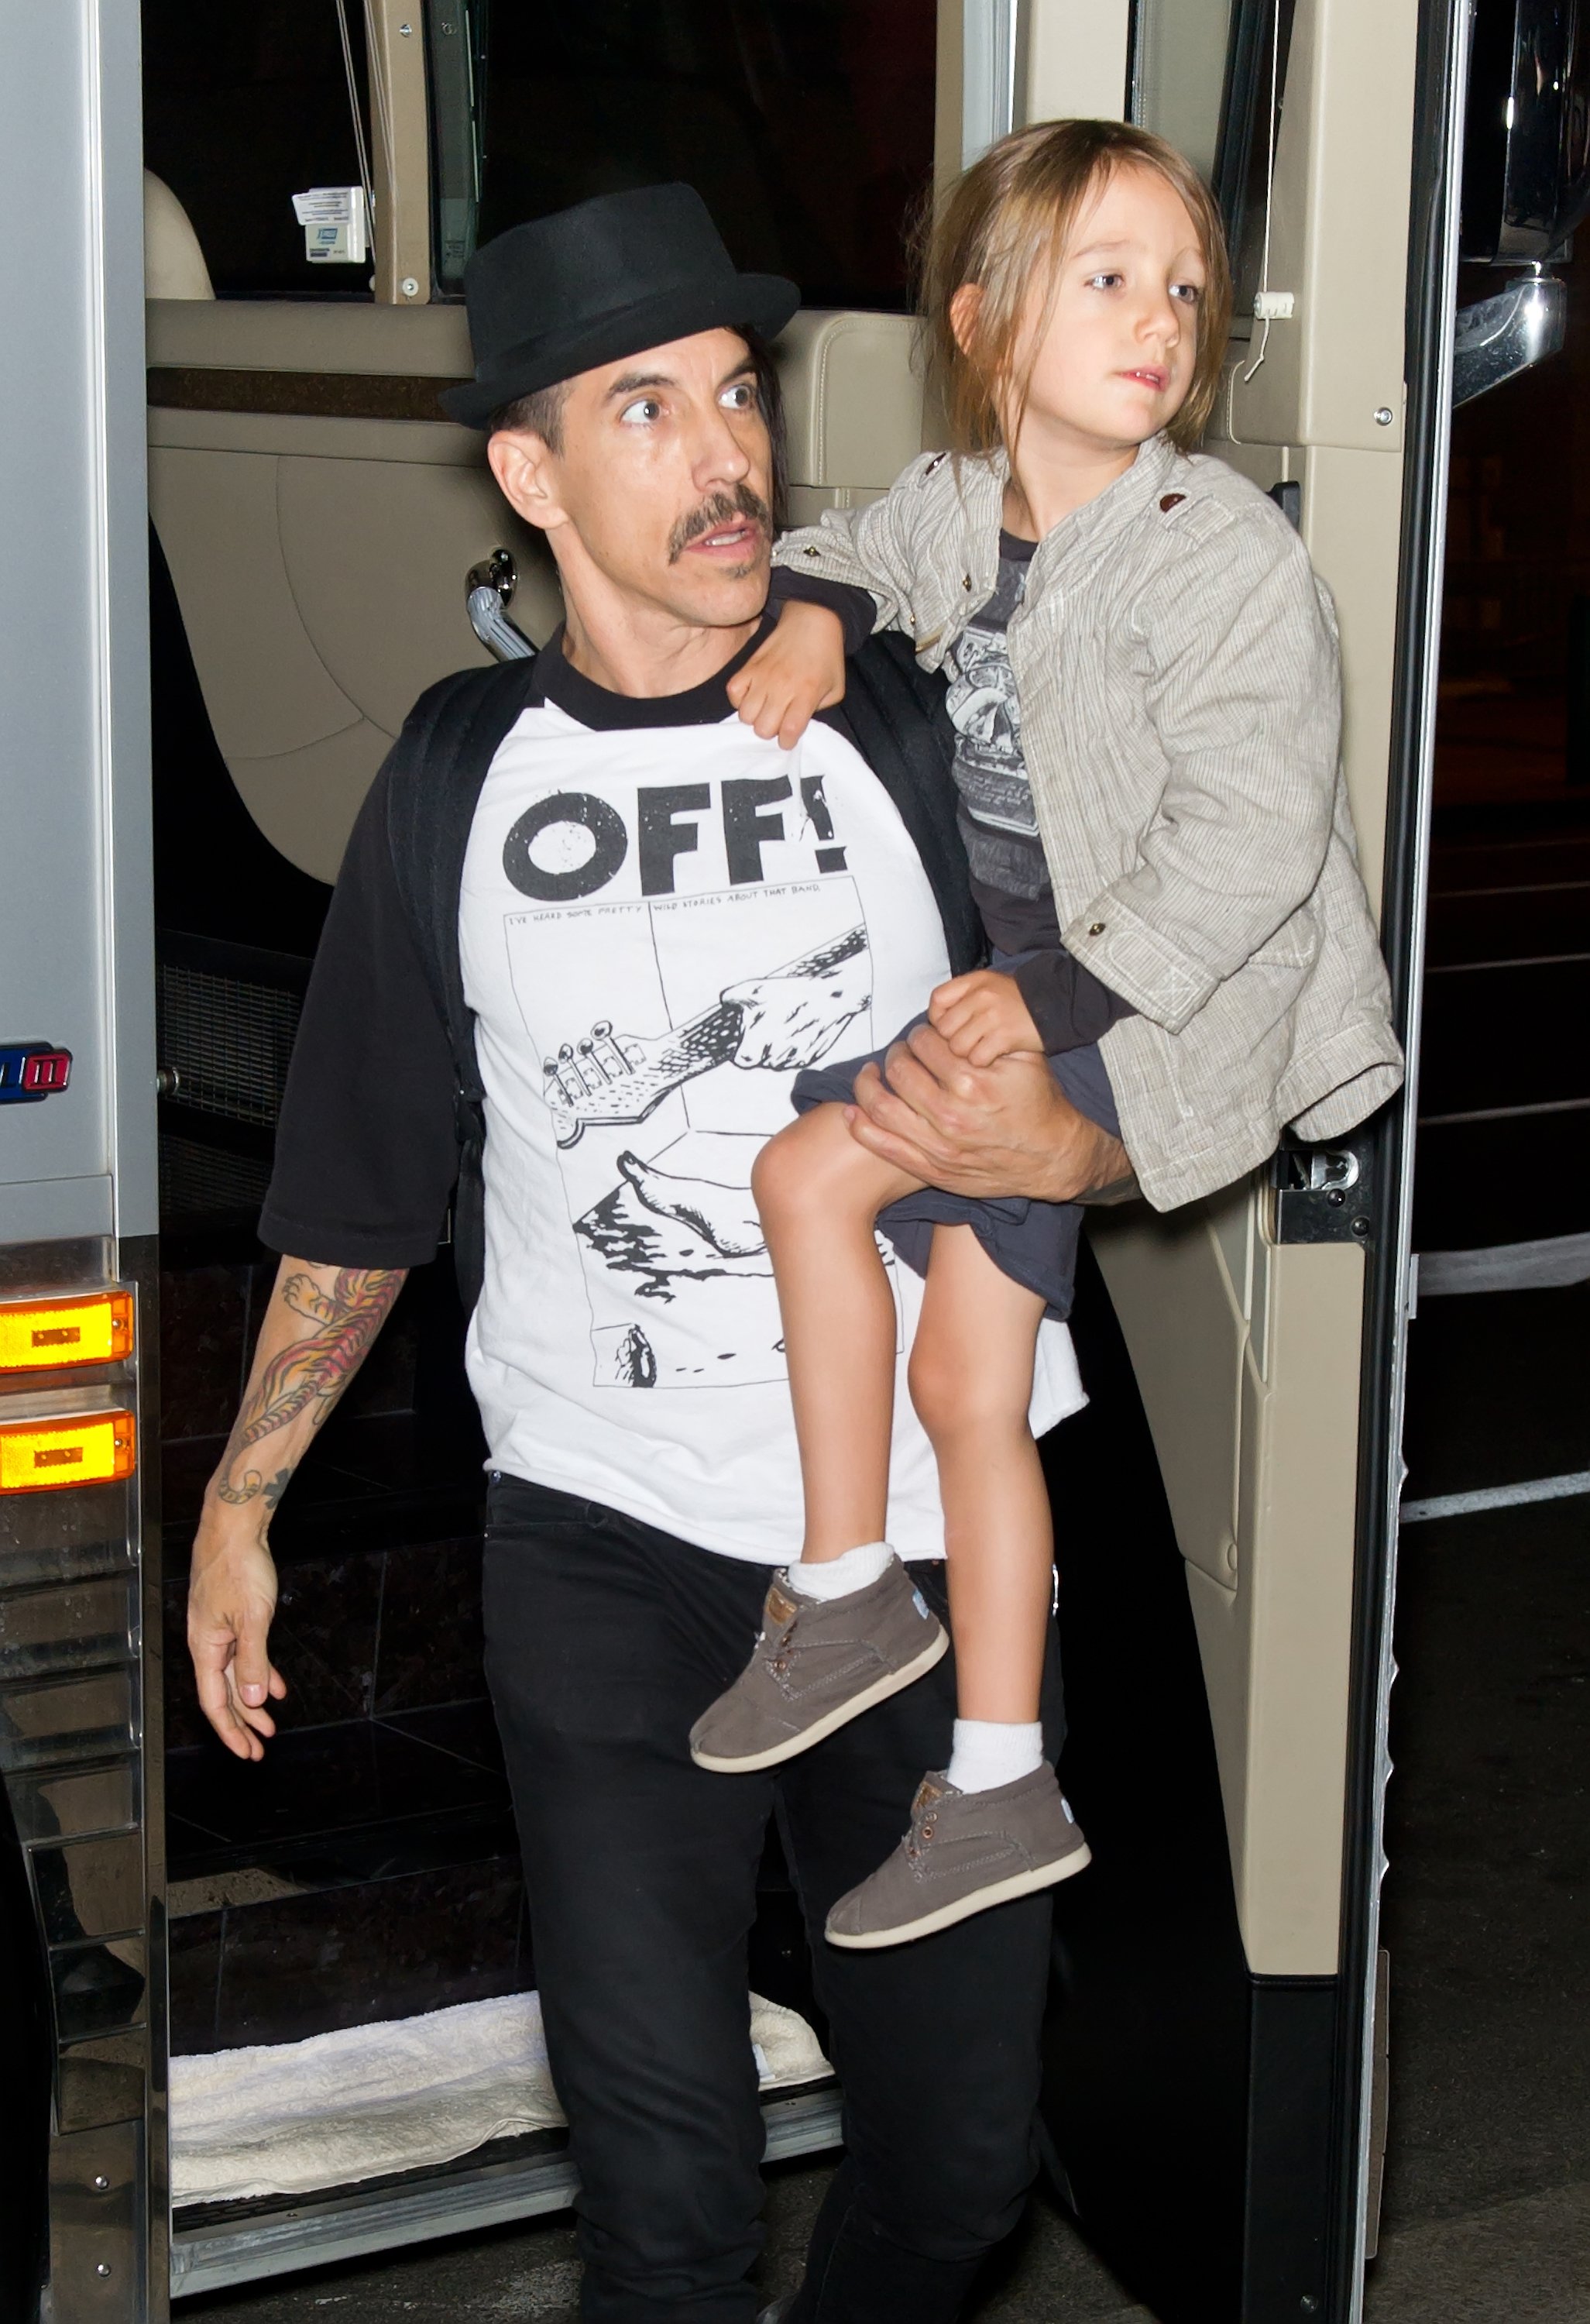 Anthony Kiedis of the Red Hot Chili Peppers and Everly Bear Kiedis sighted in the Streets of Philadelphia on May 11, 2012 in Philadelphia, Pennsylvania. | Source: Getty Images